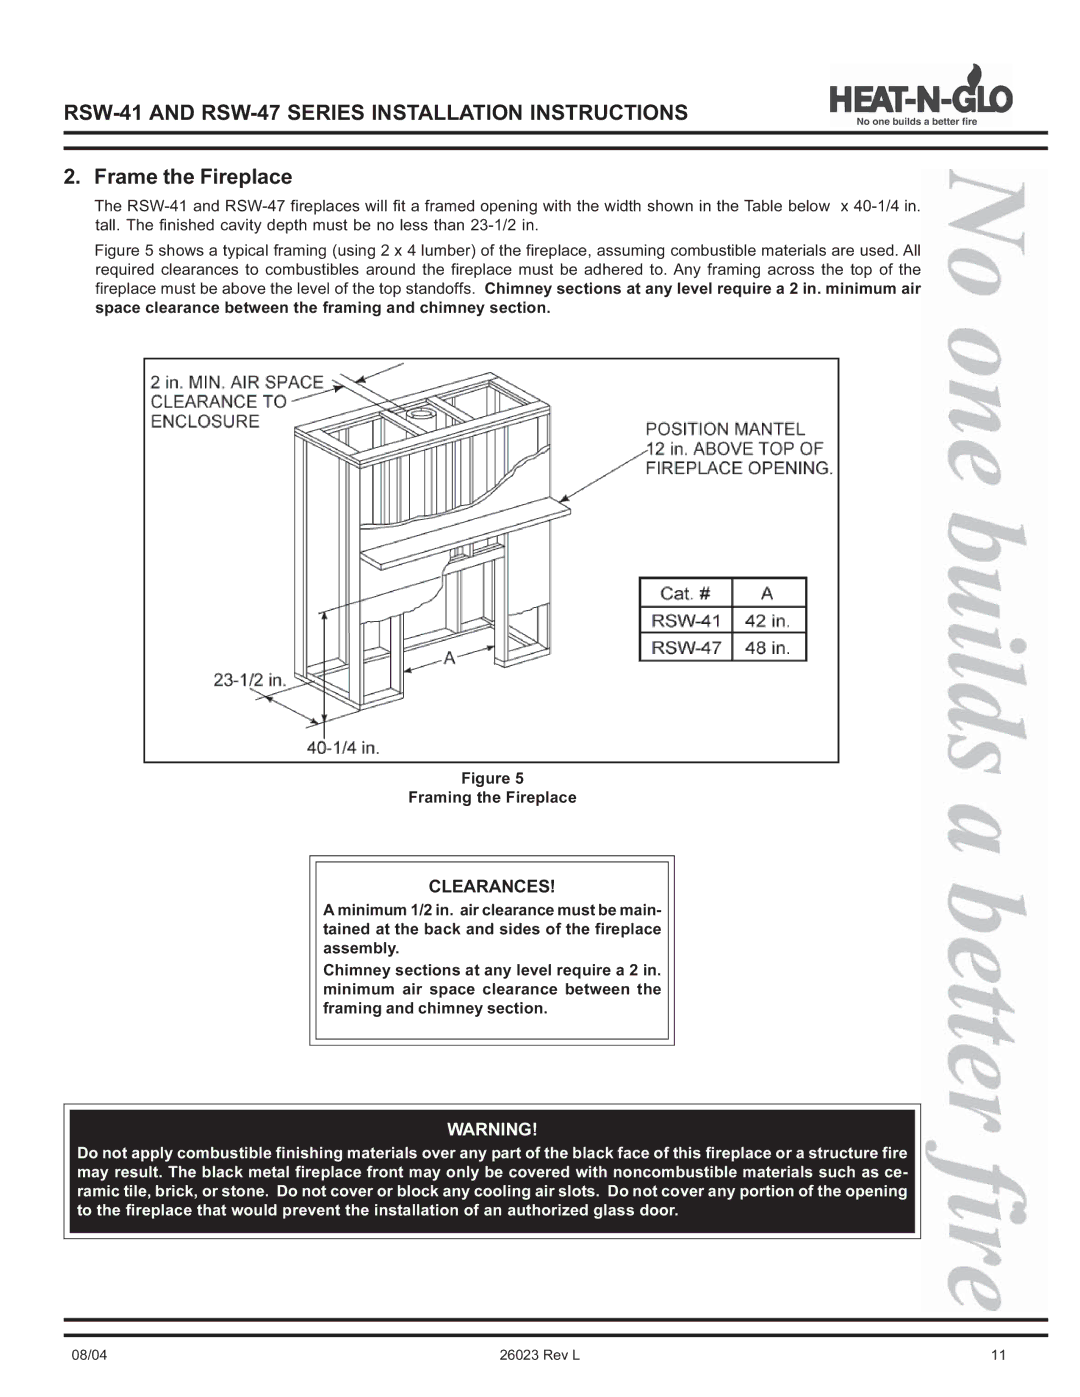 Hearth and Home Technologies RSW-47, RSW-41 manual Frame the Fireplace 